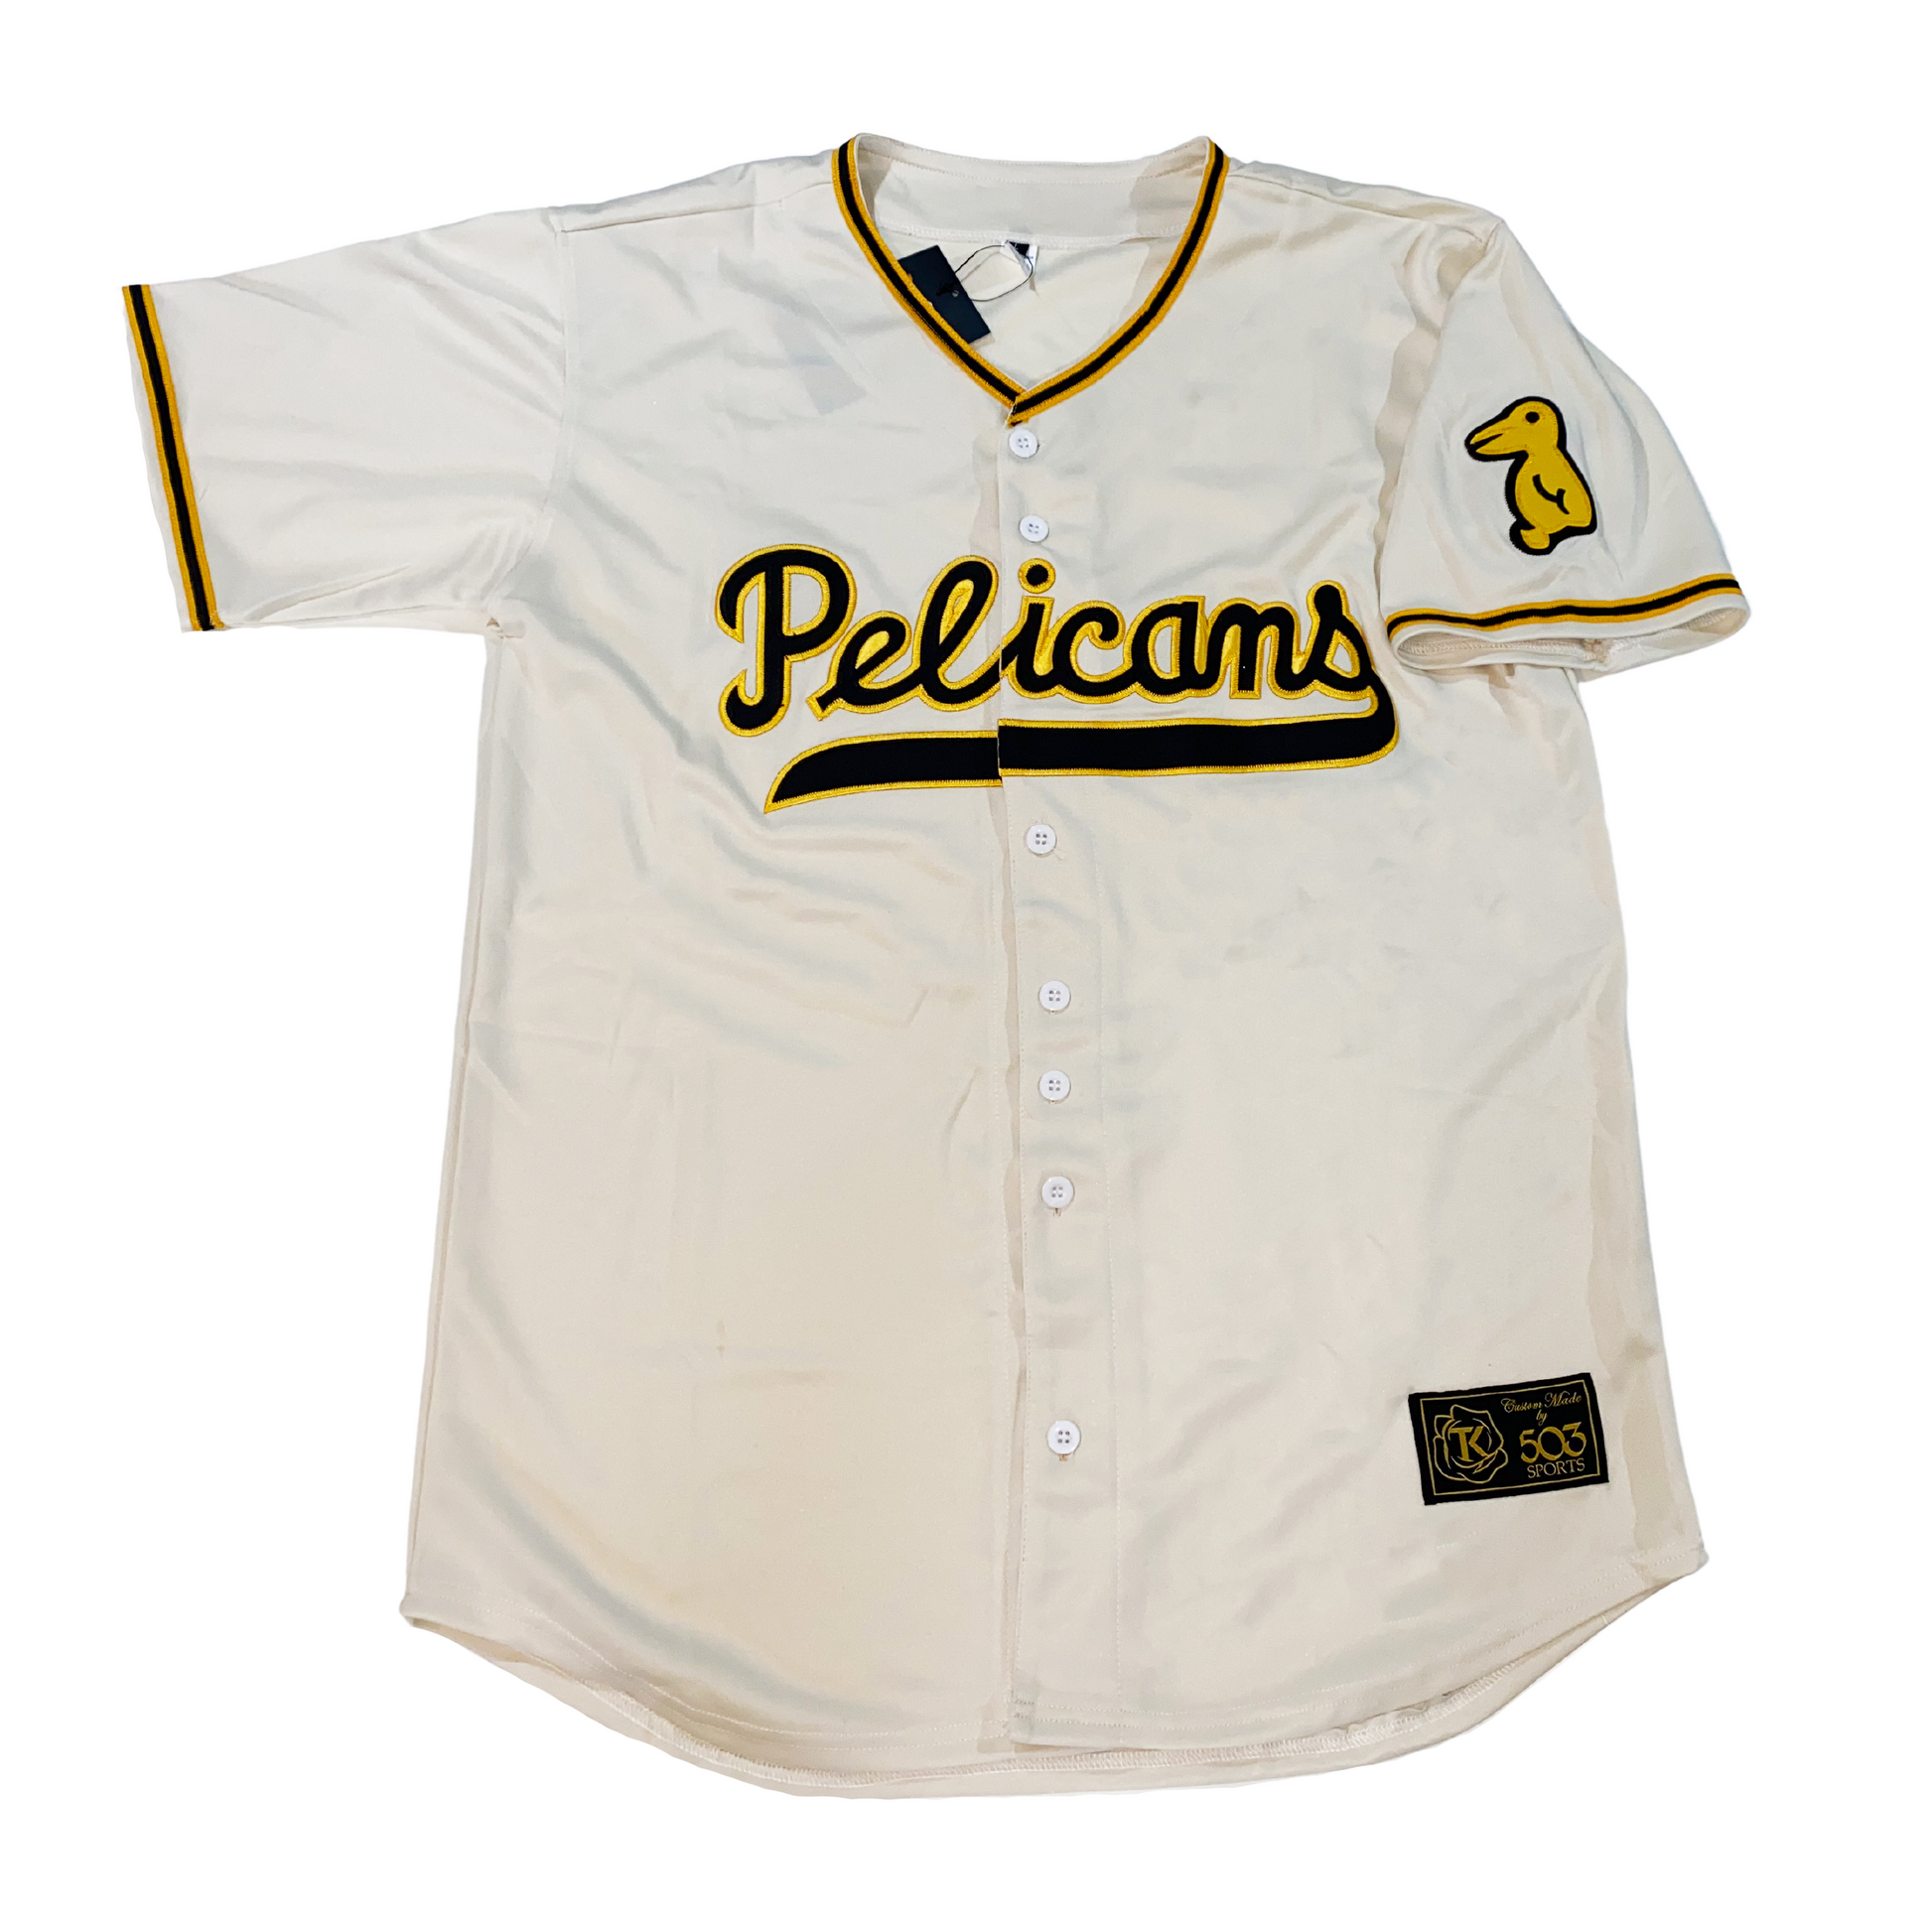 New Orleans Pelicans Jersey For Babies, Youth, Women, or Men